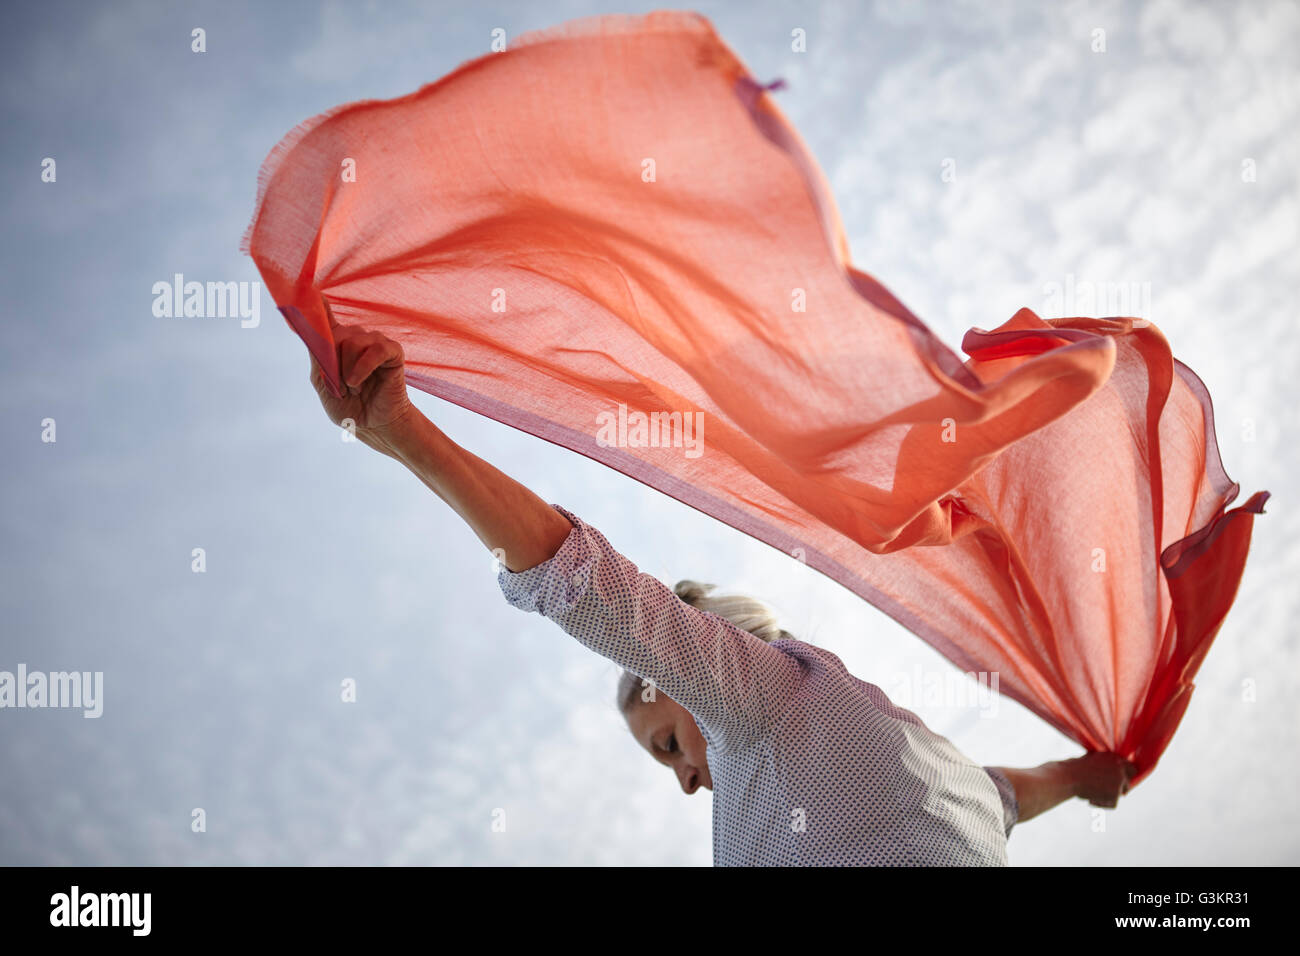 Mature woman outdoors, holding scarf behind her, low angle view Stock Photo